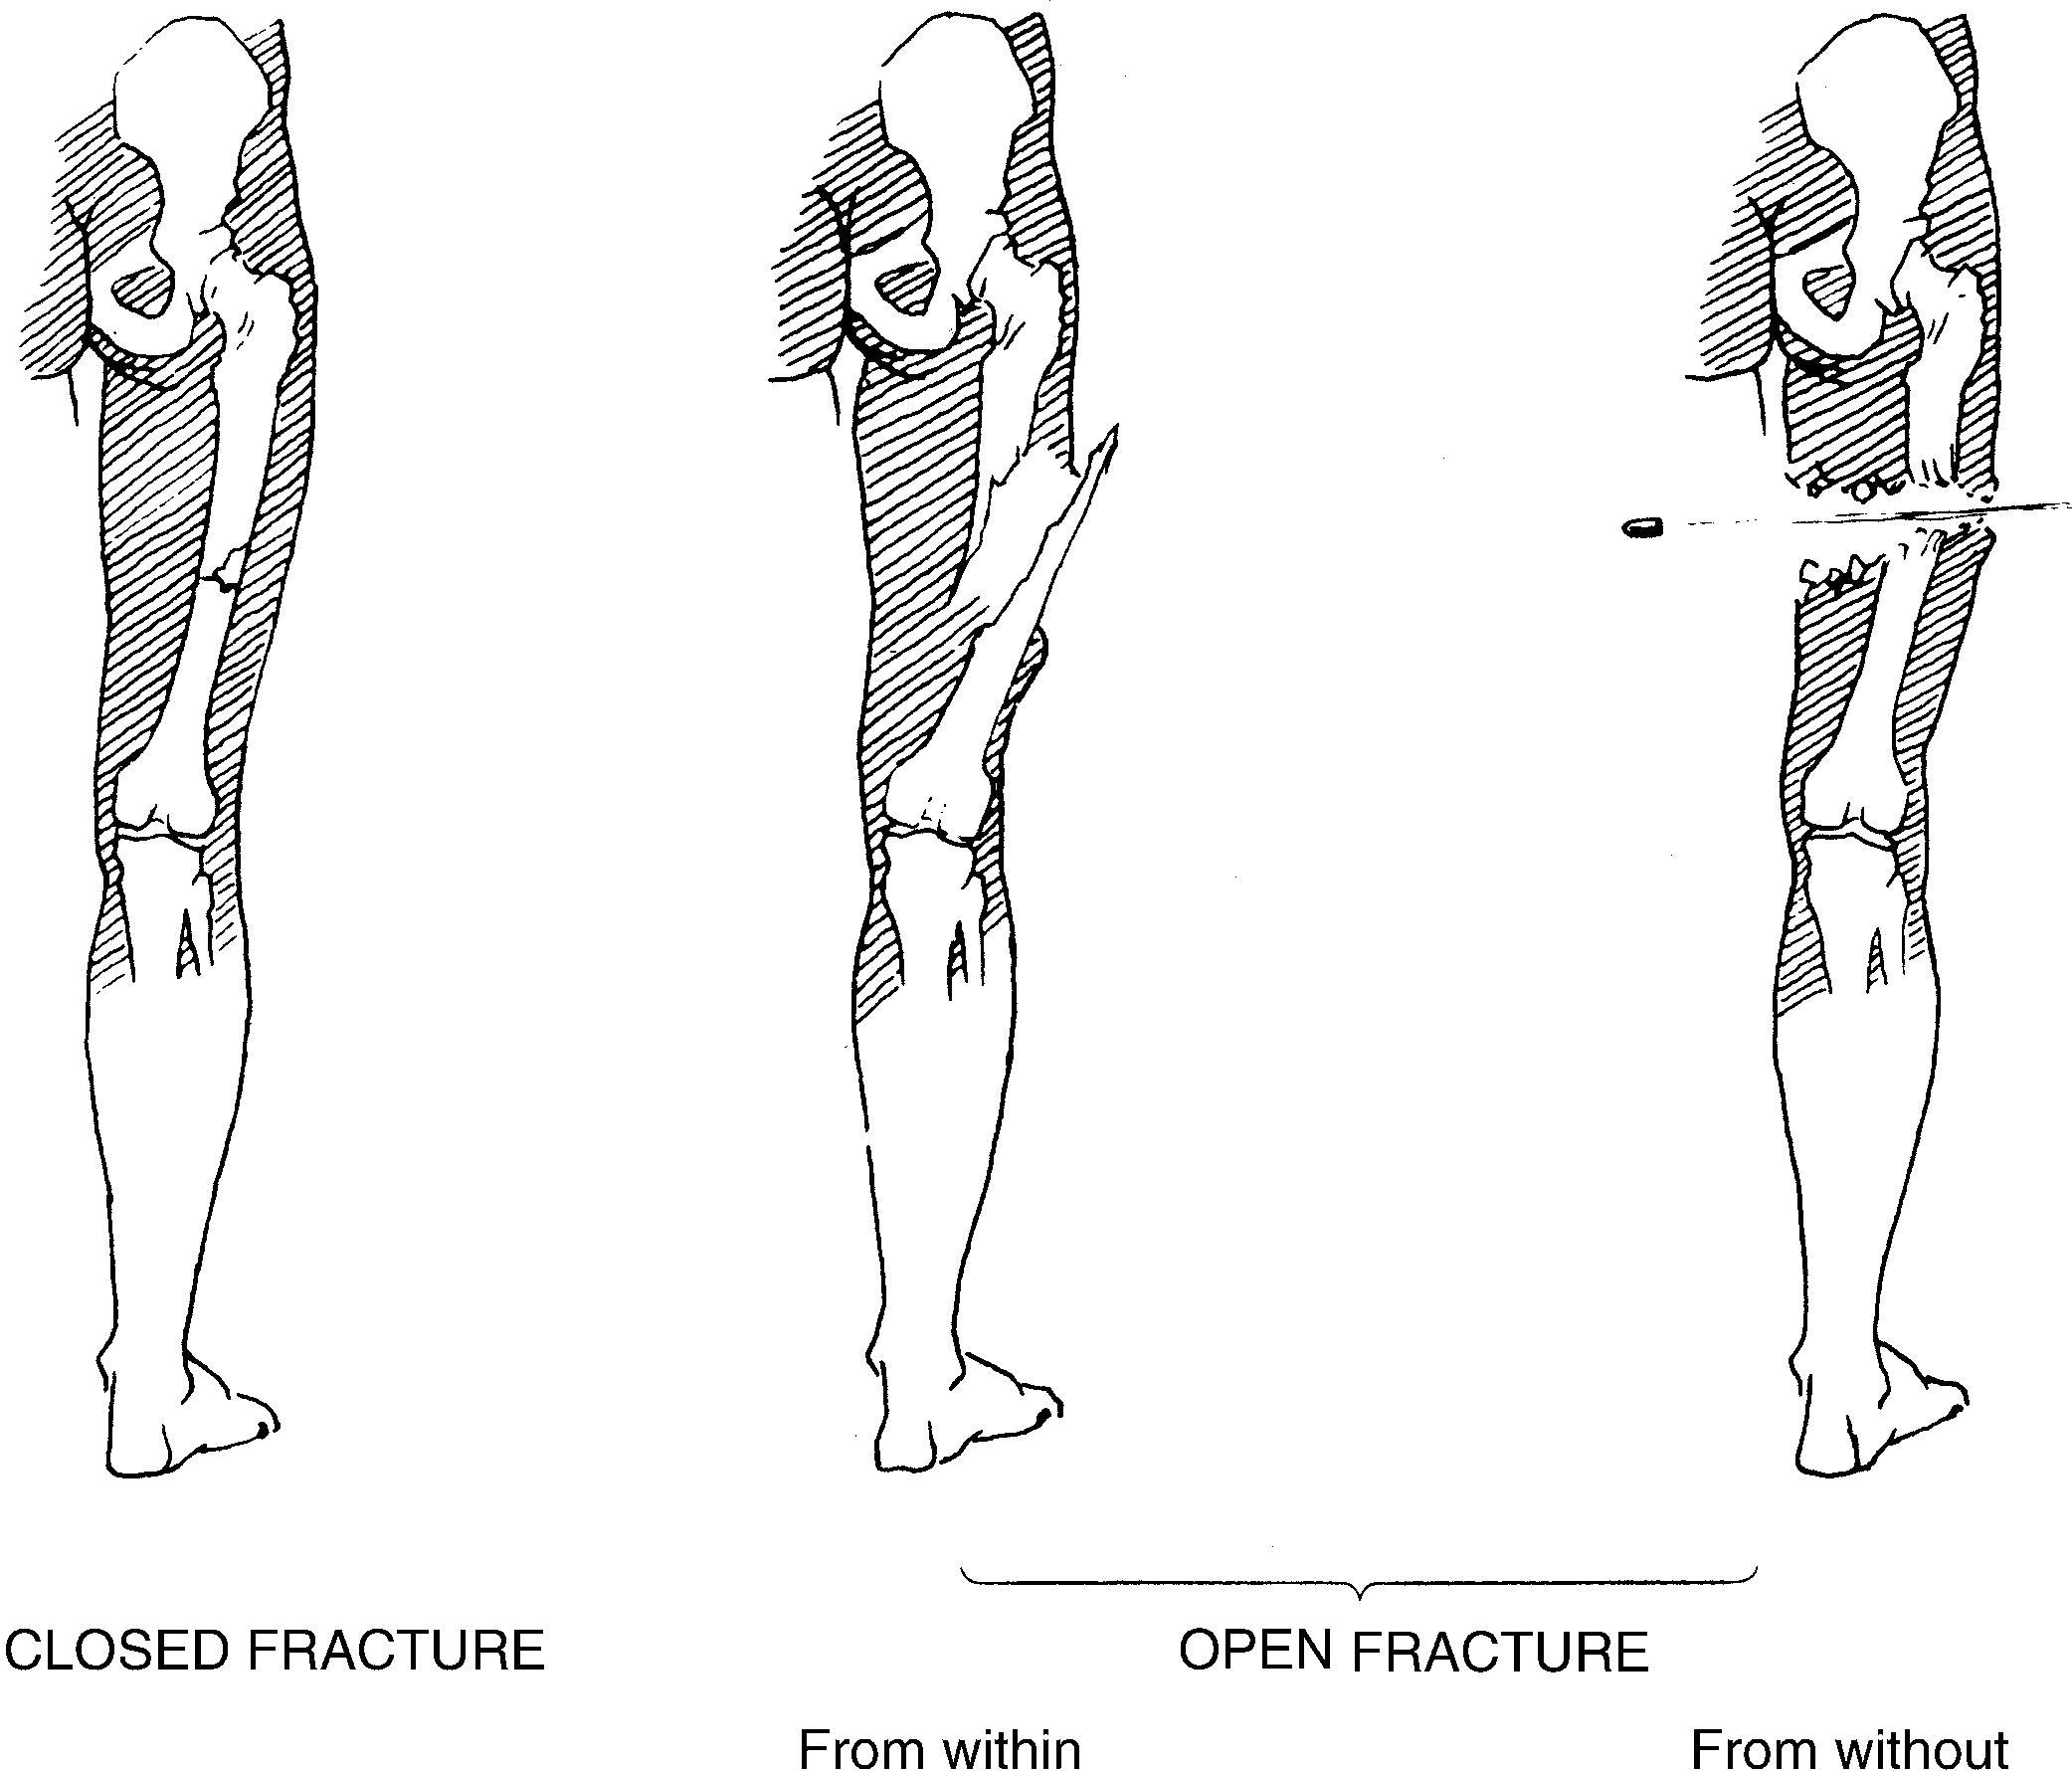 Fig. 1-1Closed versus open fracture. (From Schneider FR: Handbook for the orthopaedic assistant , ed 2, St Louis, 1976, The CV Mosby Co.)